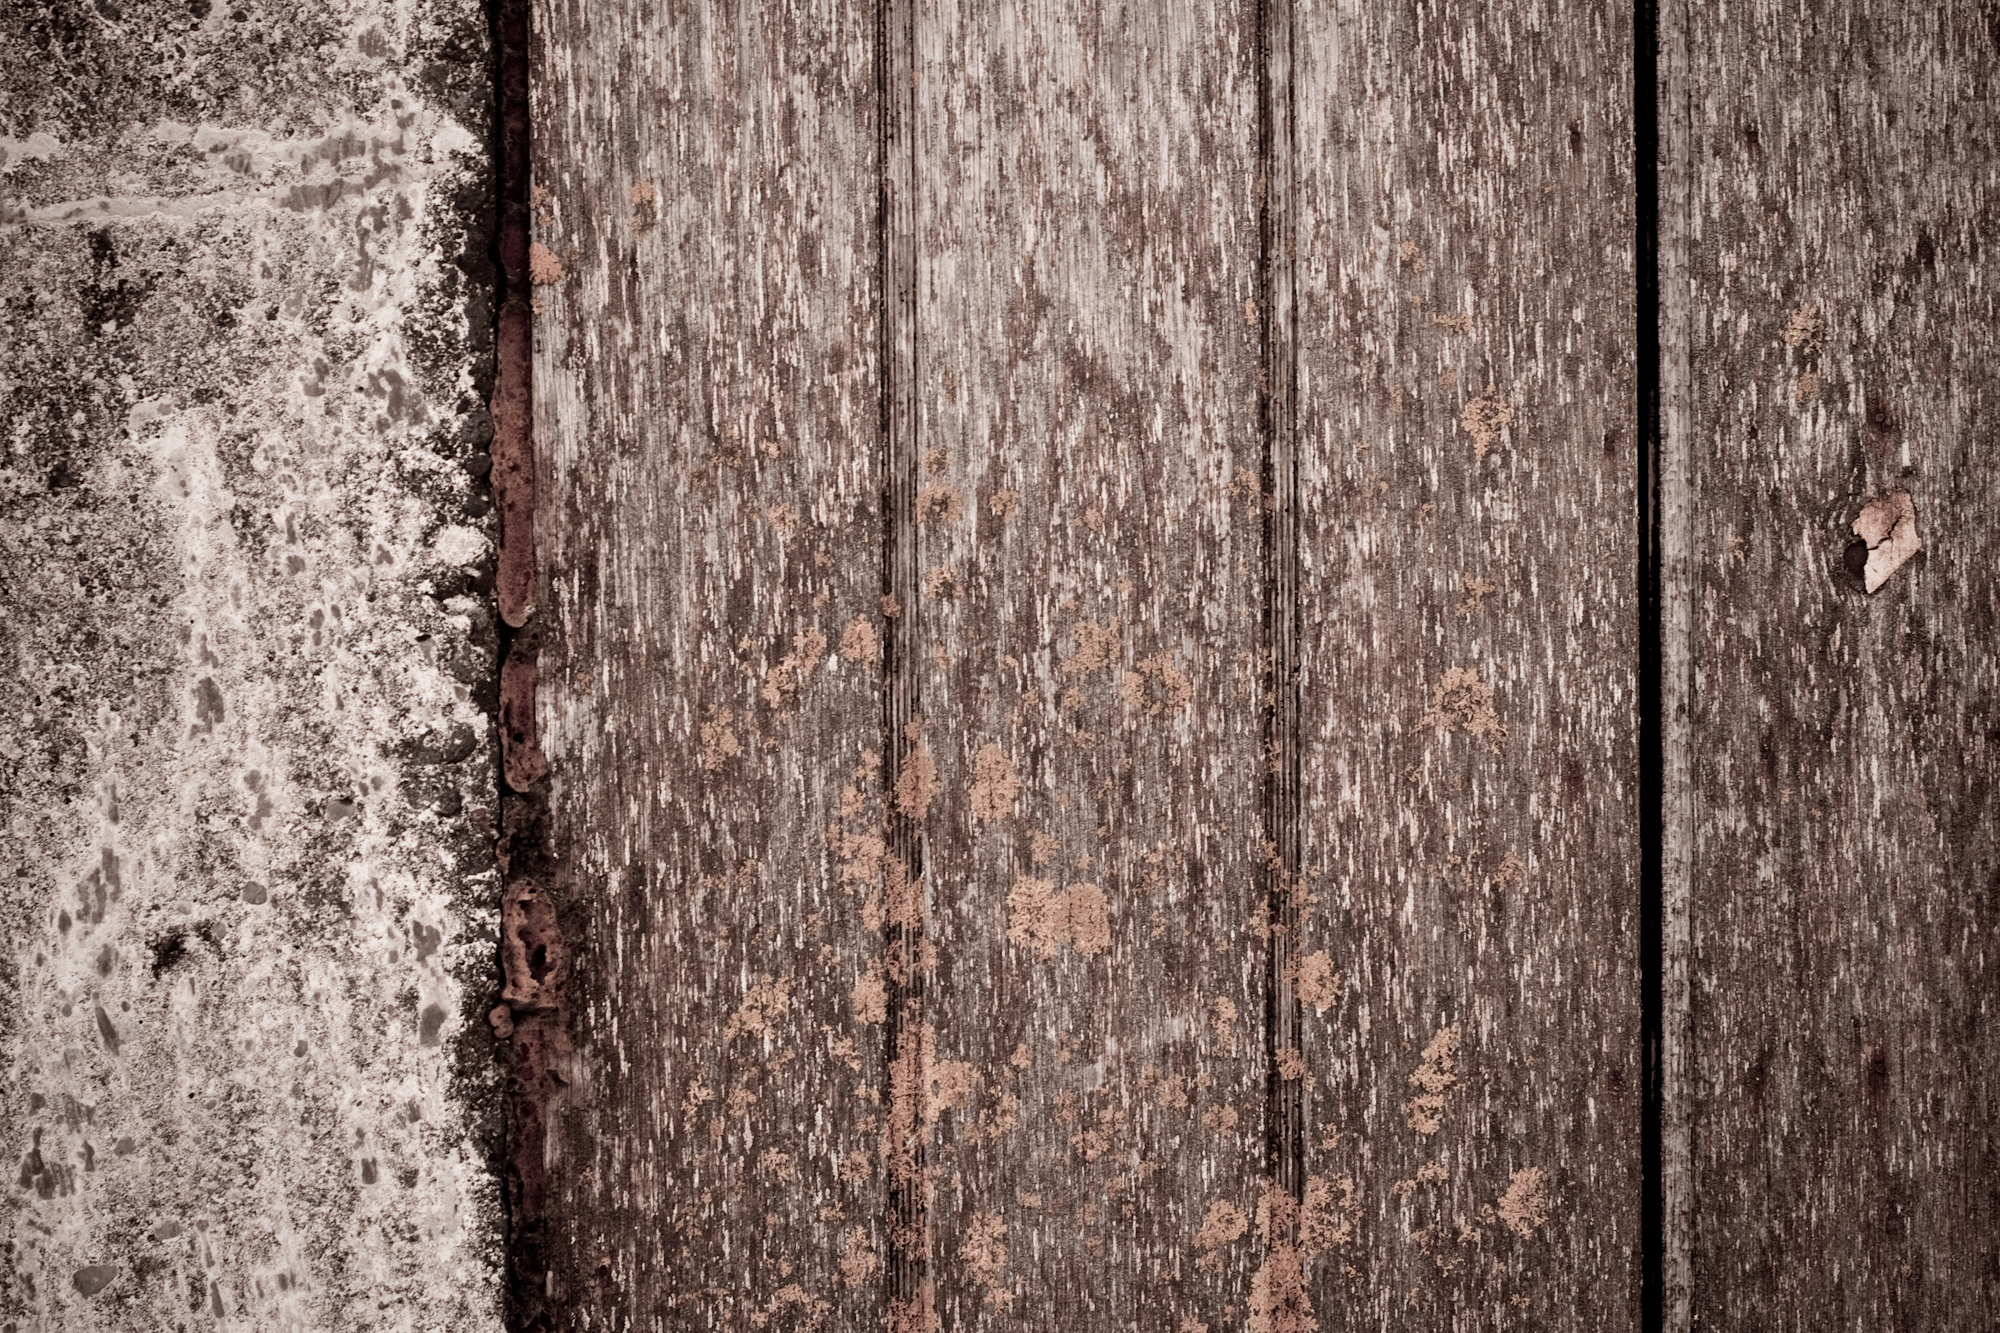 Grungy wood texture photo